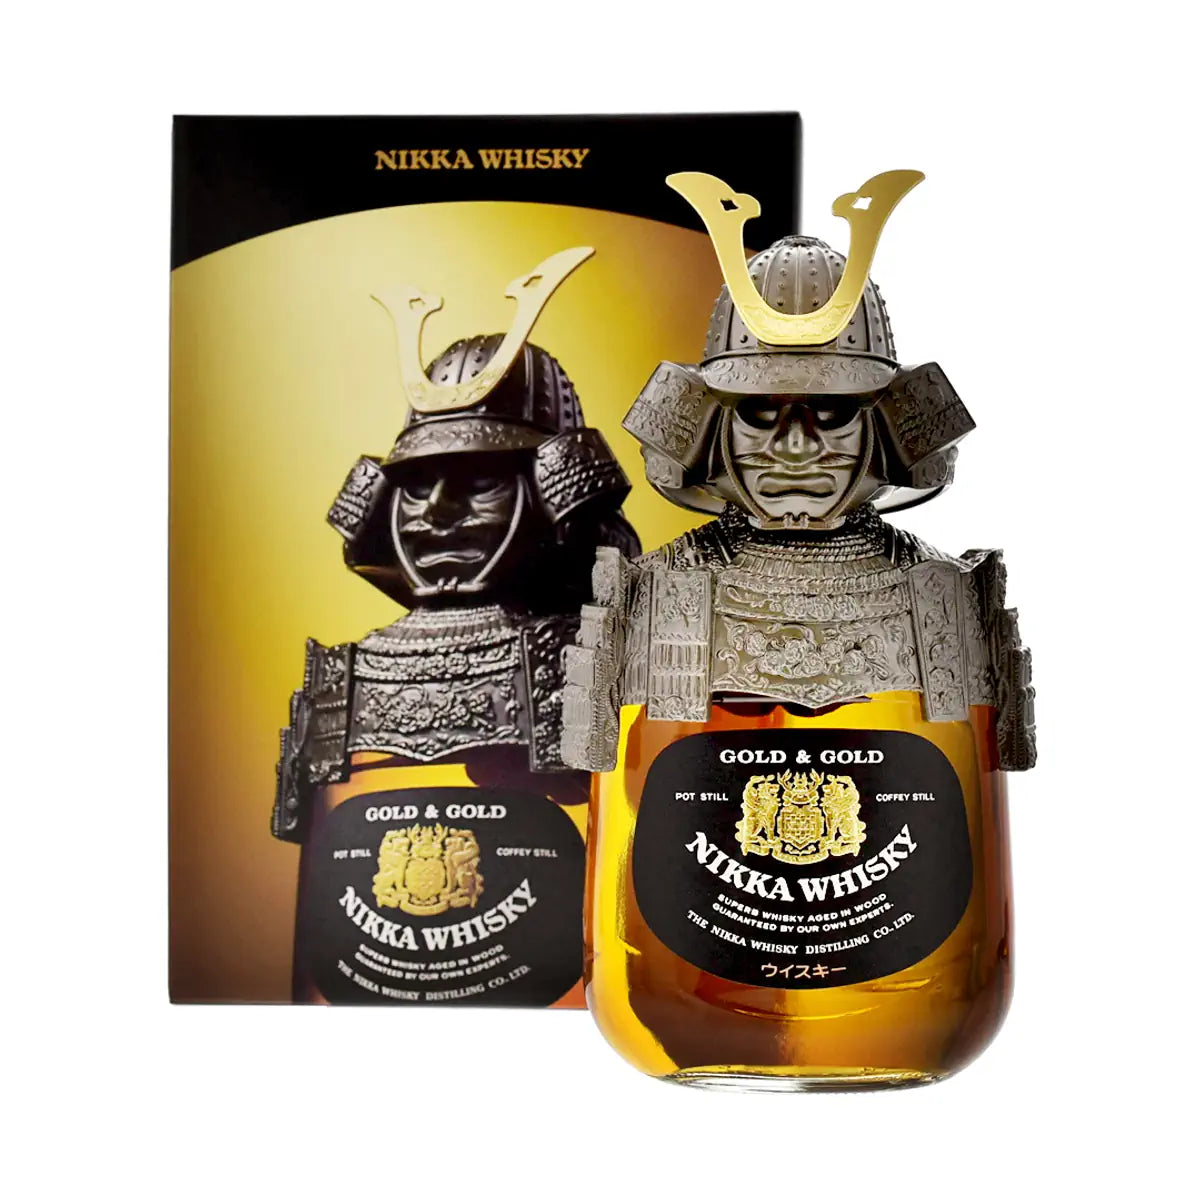 Nikka Samurai Gold & Gold Blended Whisky 75cl - SPECIAL EDITION -